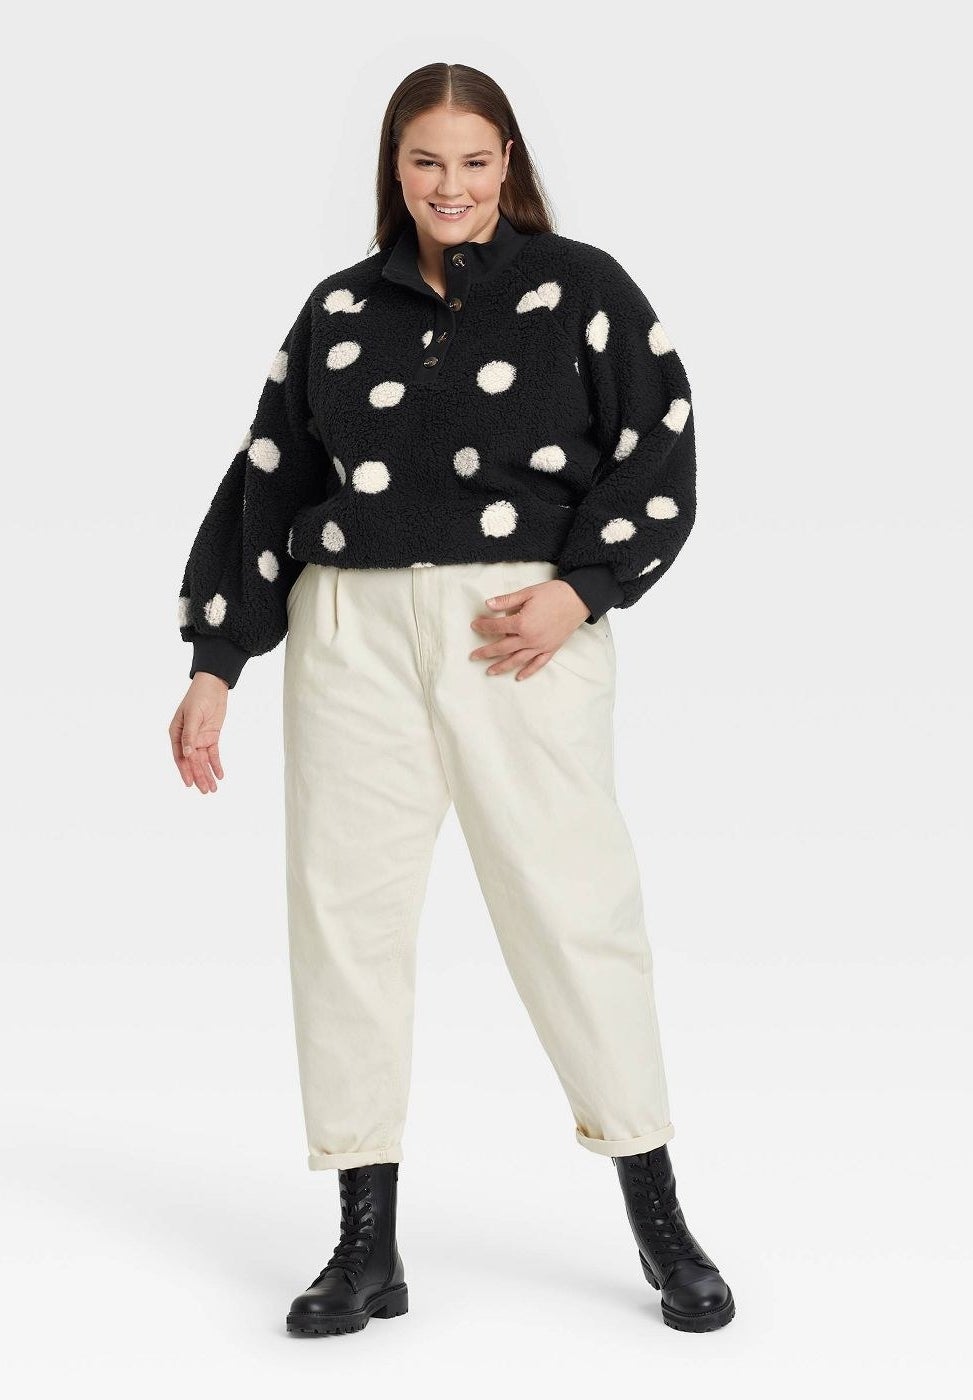 model wearing the black and white polka dot teddy pullover